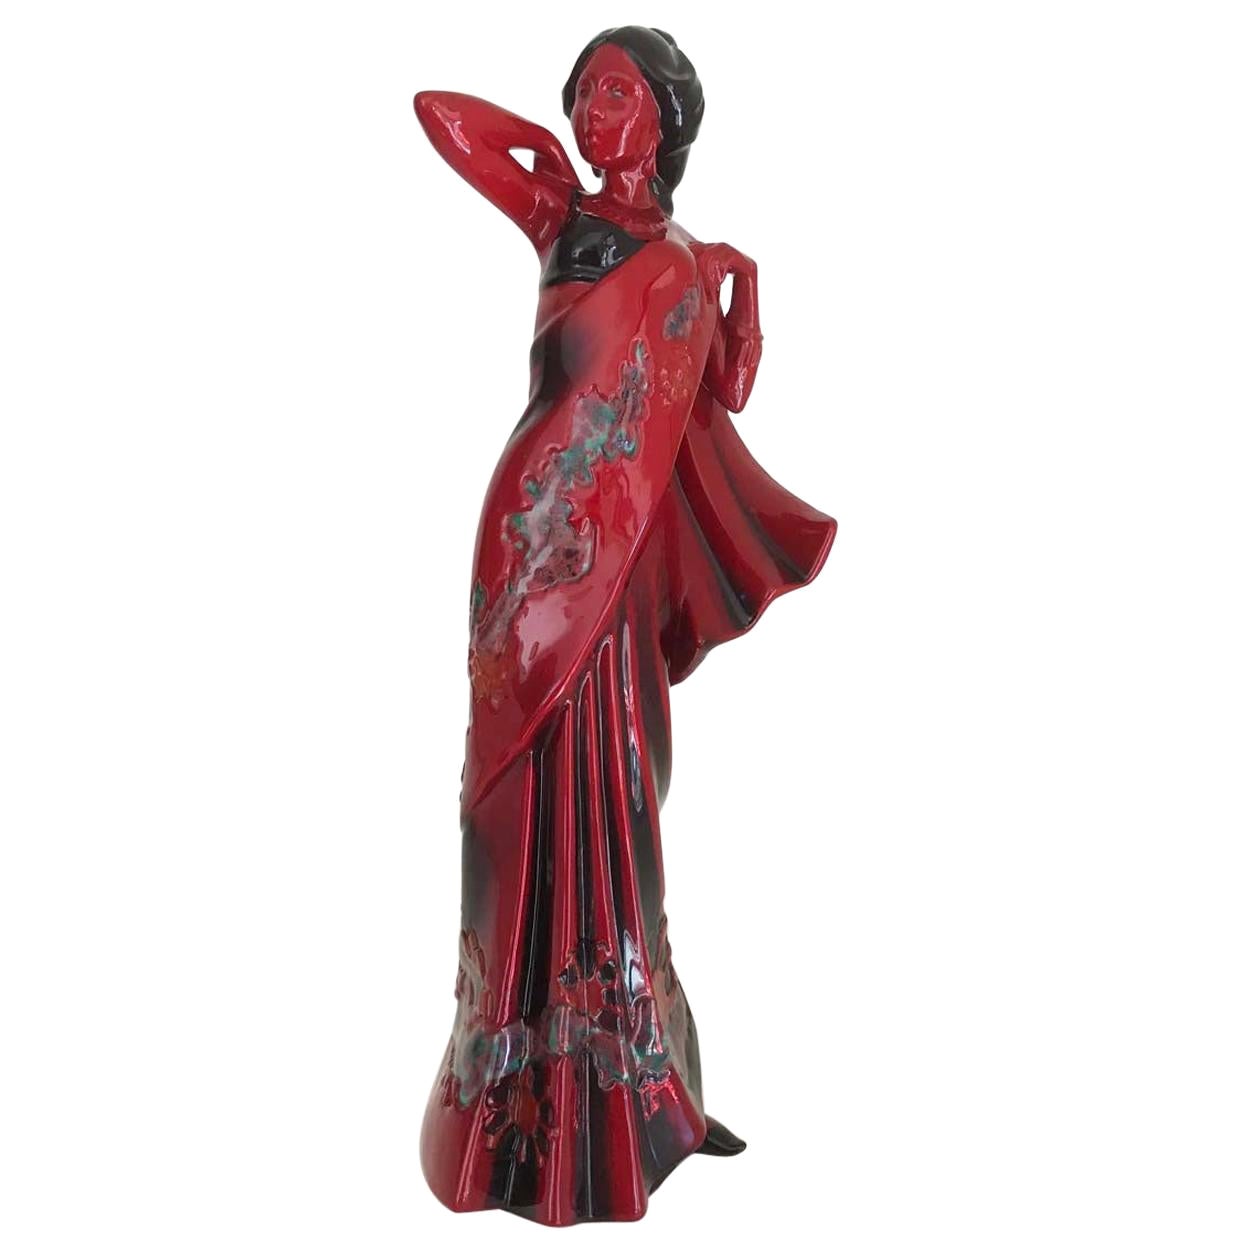 Royal Doulton Flambe Limited Edition Figurine, Eastern Grace, circa 1996